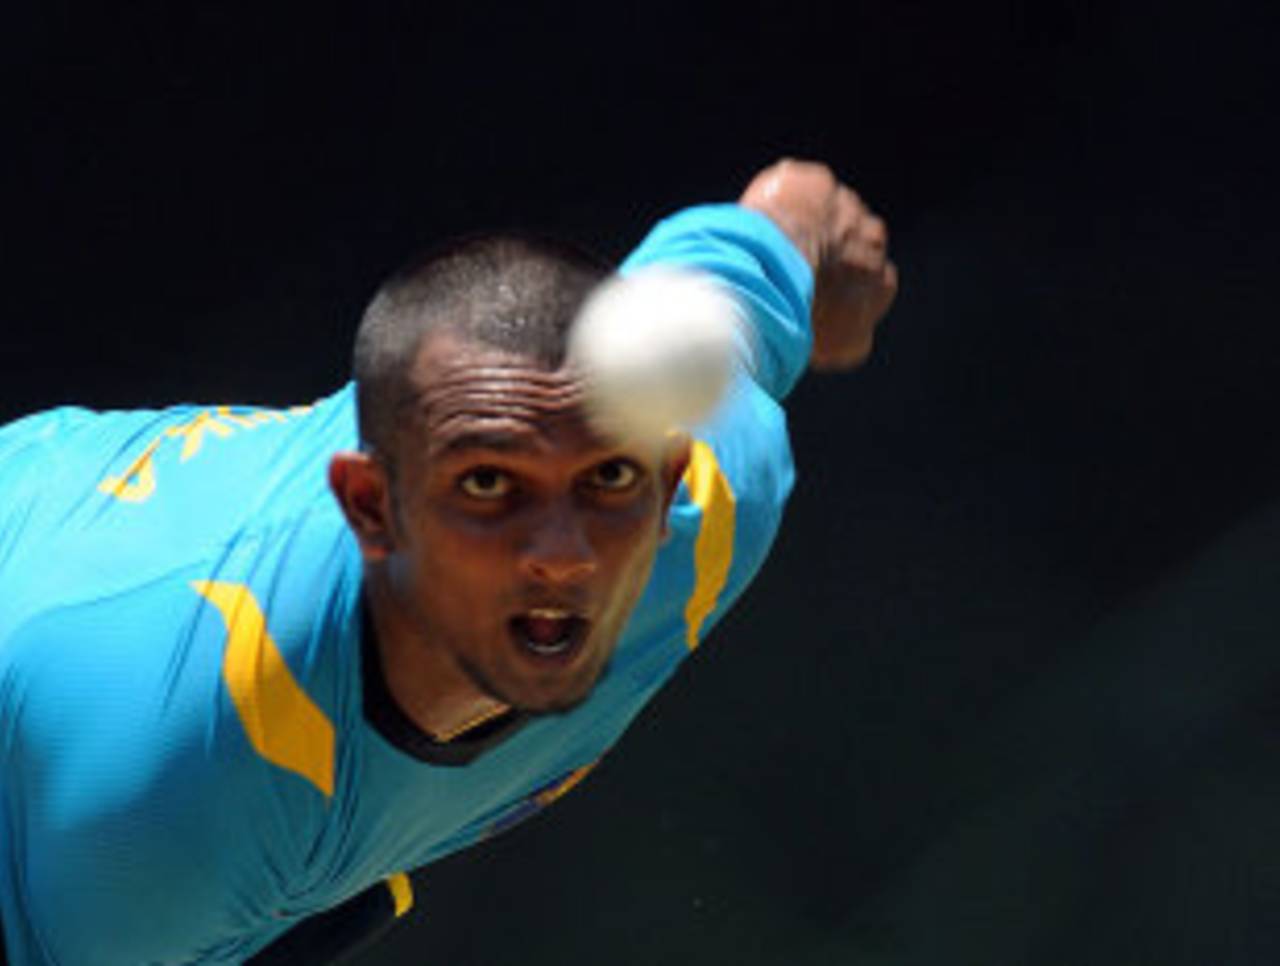 Ishan Jayaratne bowls during a practice session in Pallekele before the T20 match between Sri Lanka and Bangladesh, March 30, 2013